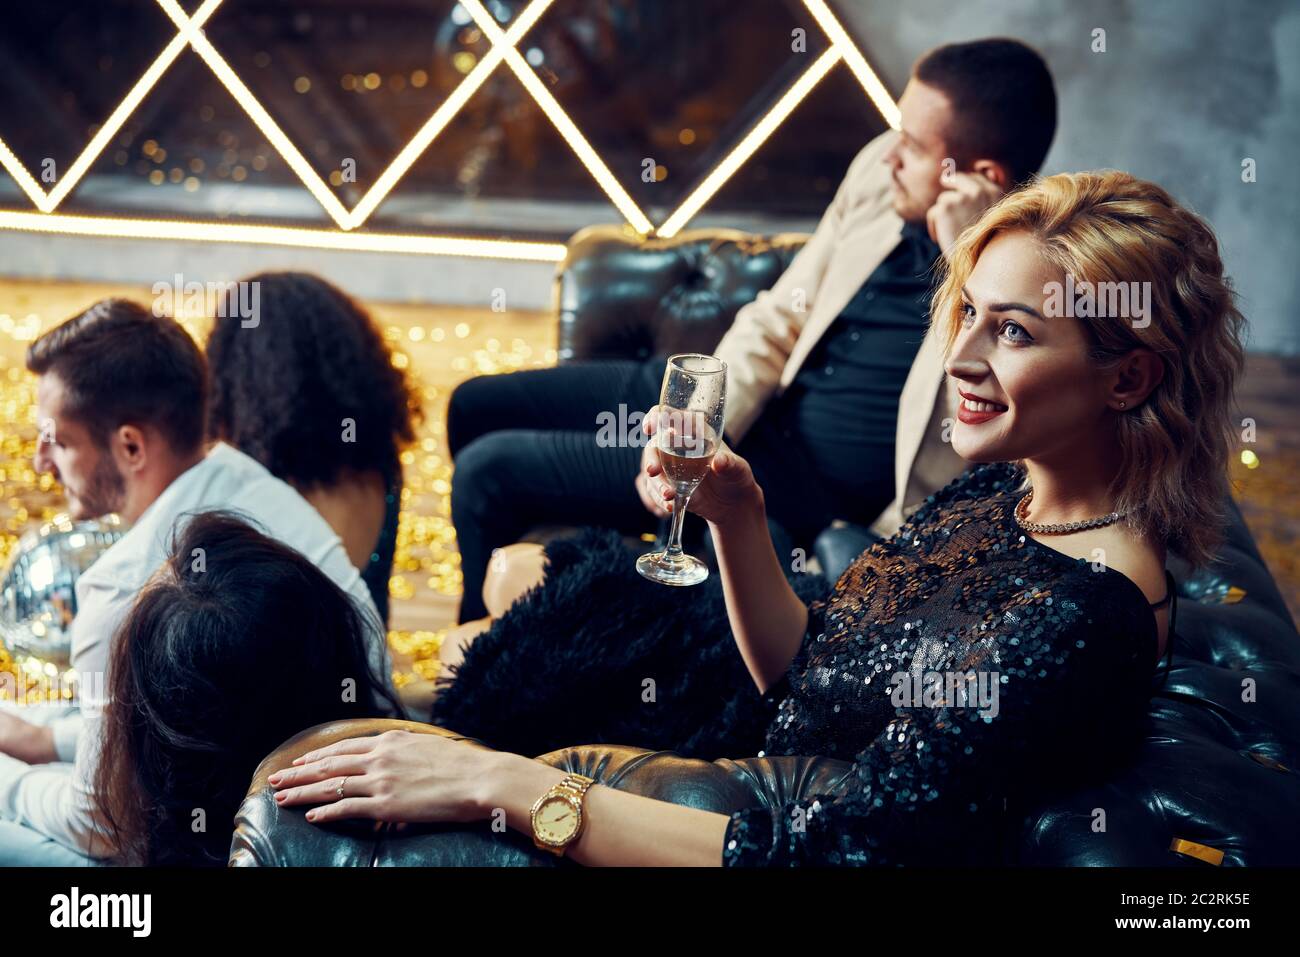 Diverse group of young friends hang out and drink champagne at night club Stock Photo